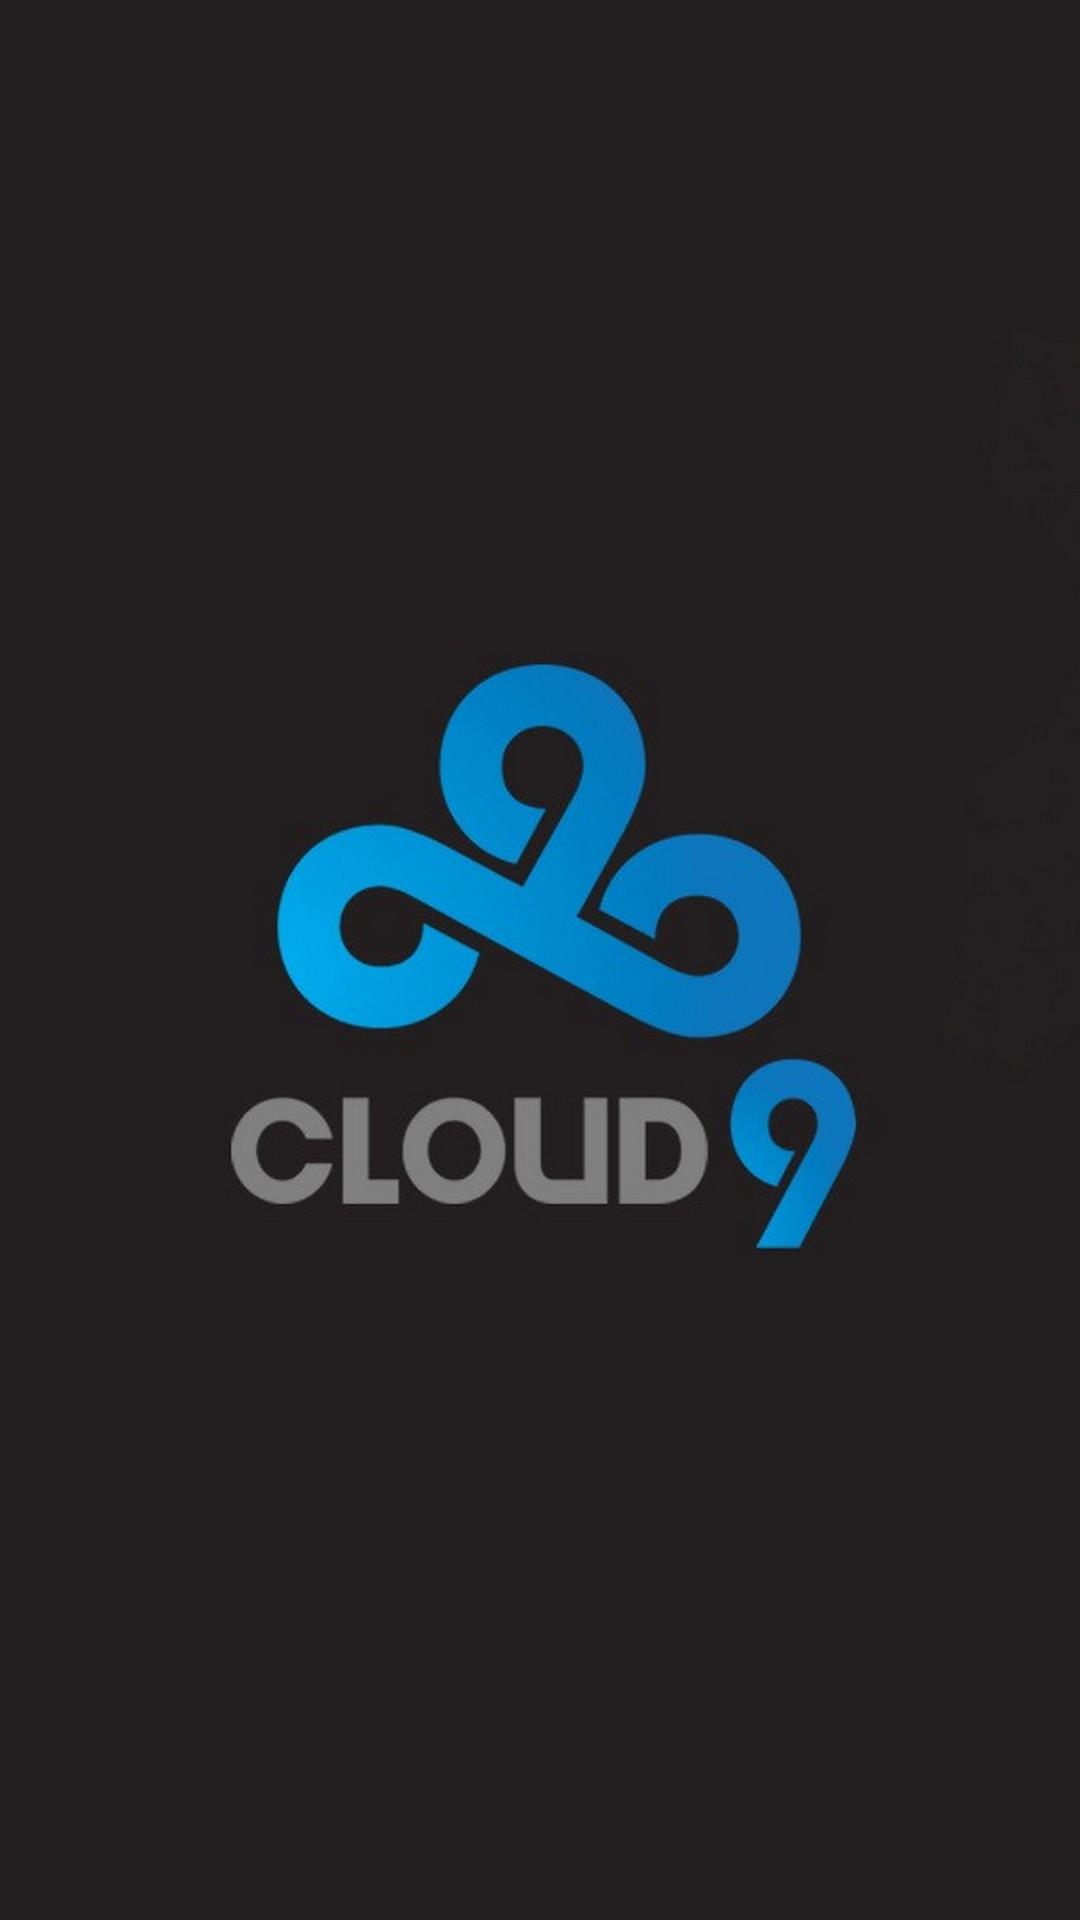 Cloud 9 Games Wallpaper For Android Android Wallpaper